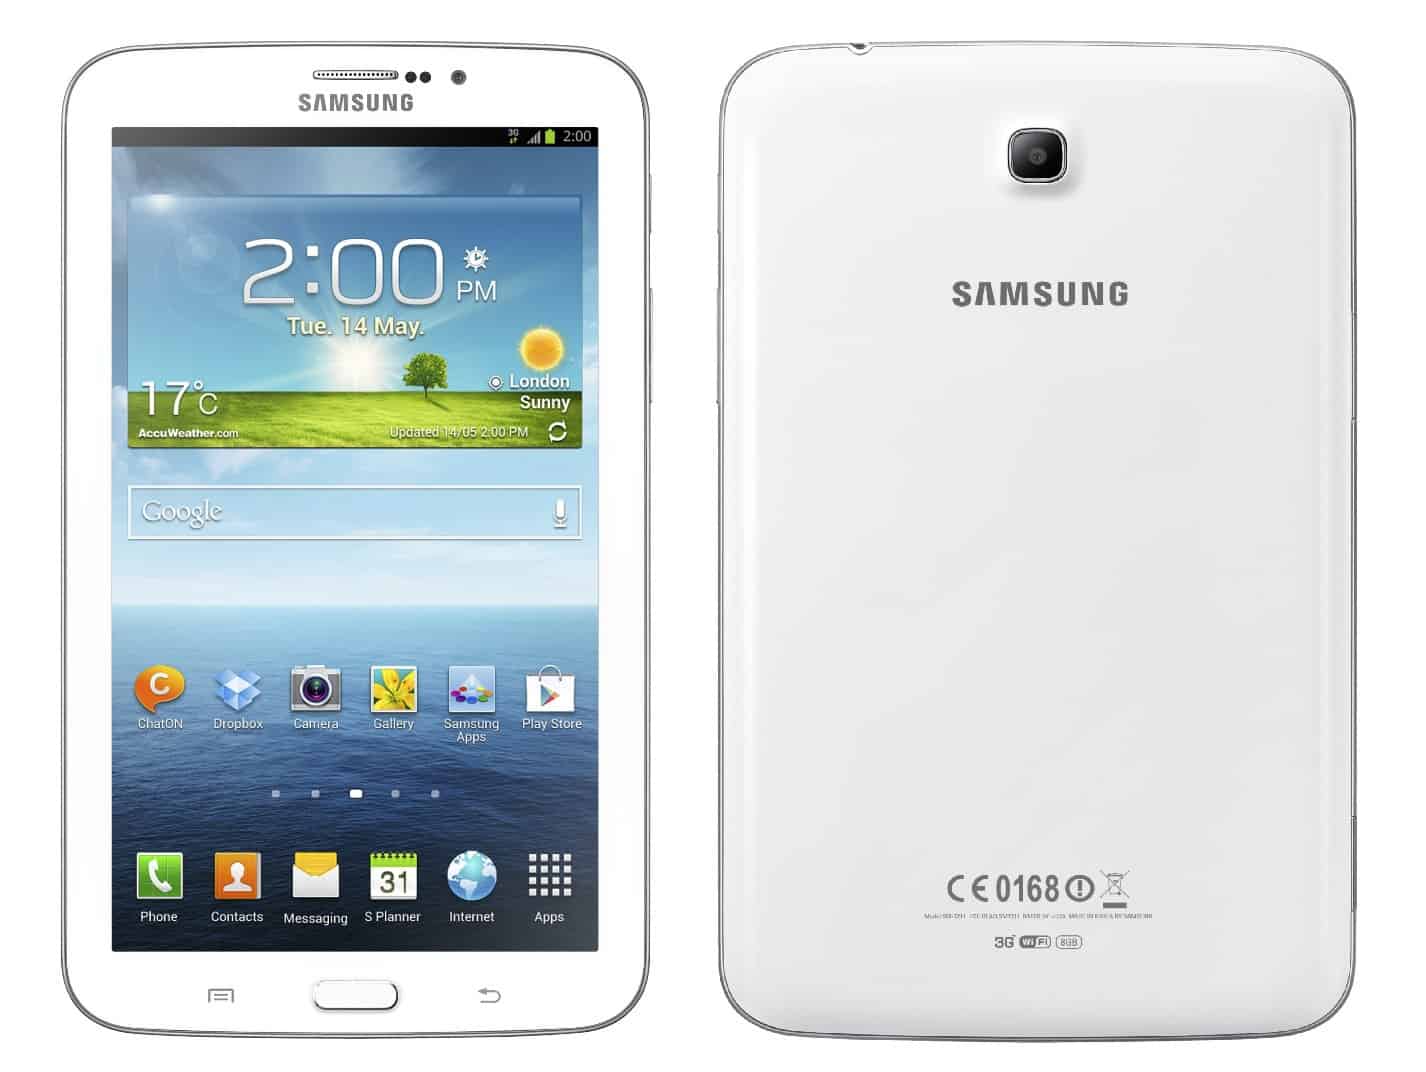 How to Root the Samsung Galaxy Tab 3 7.0